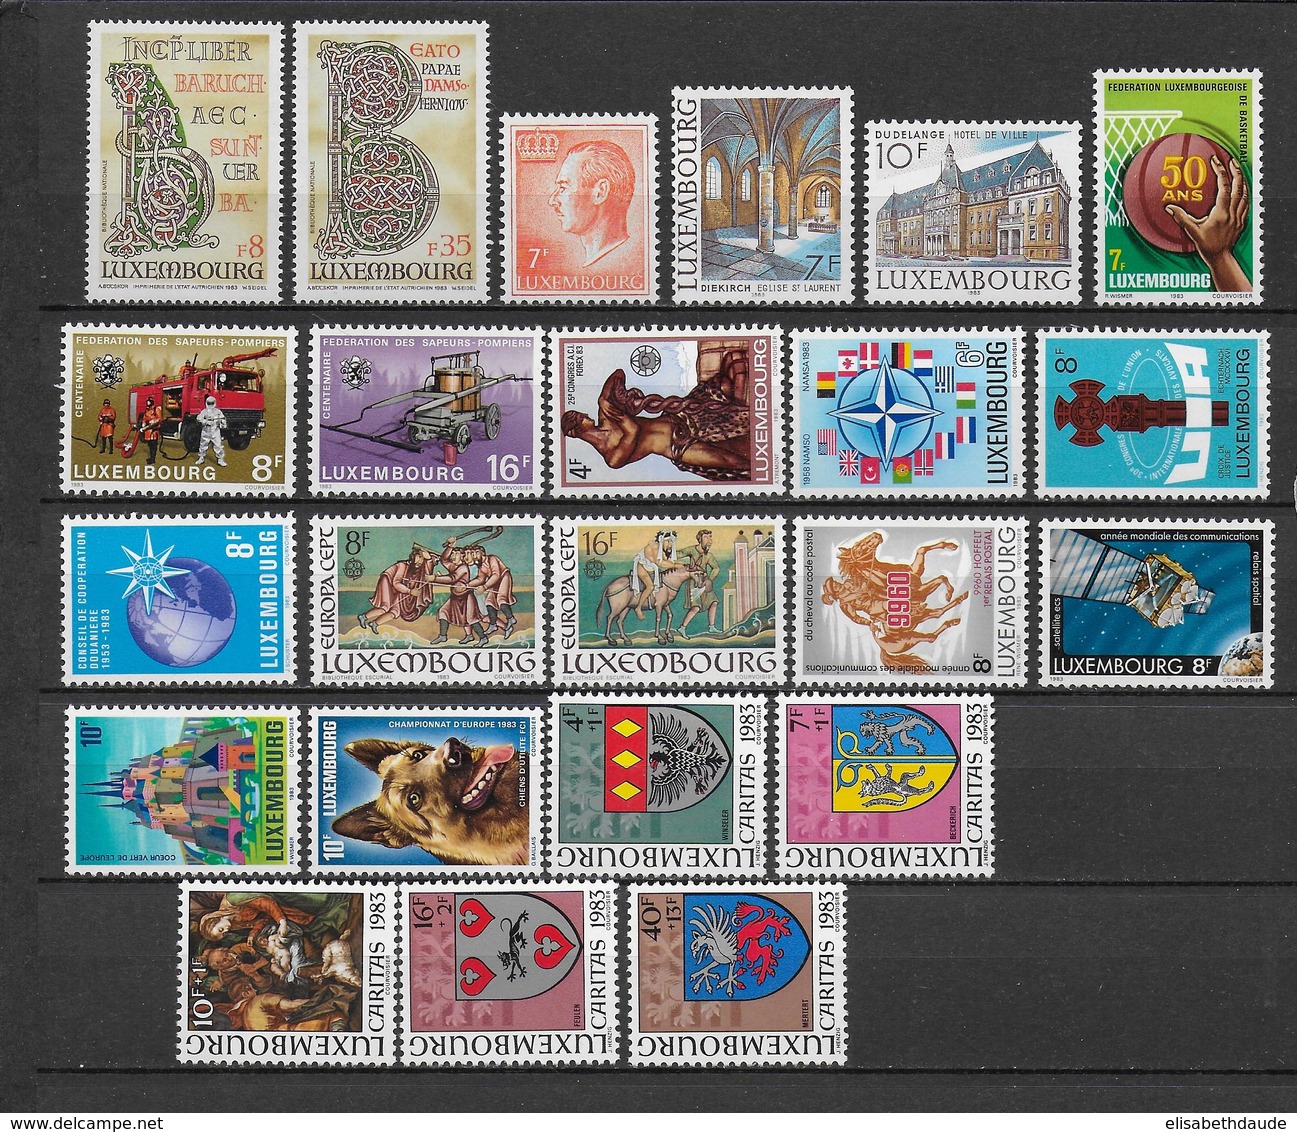 LUXEMBOURG - ANNEE COMPLETE 1983 ** MNH - - Full Years